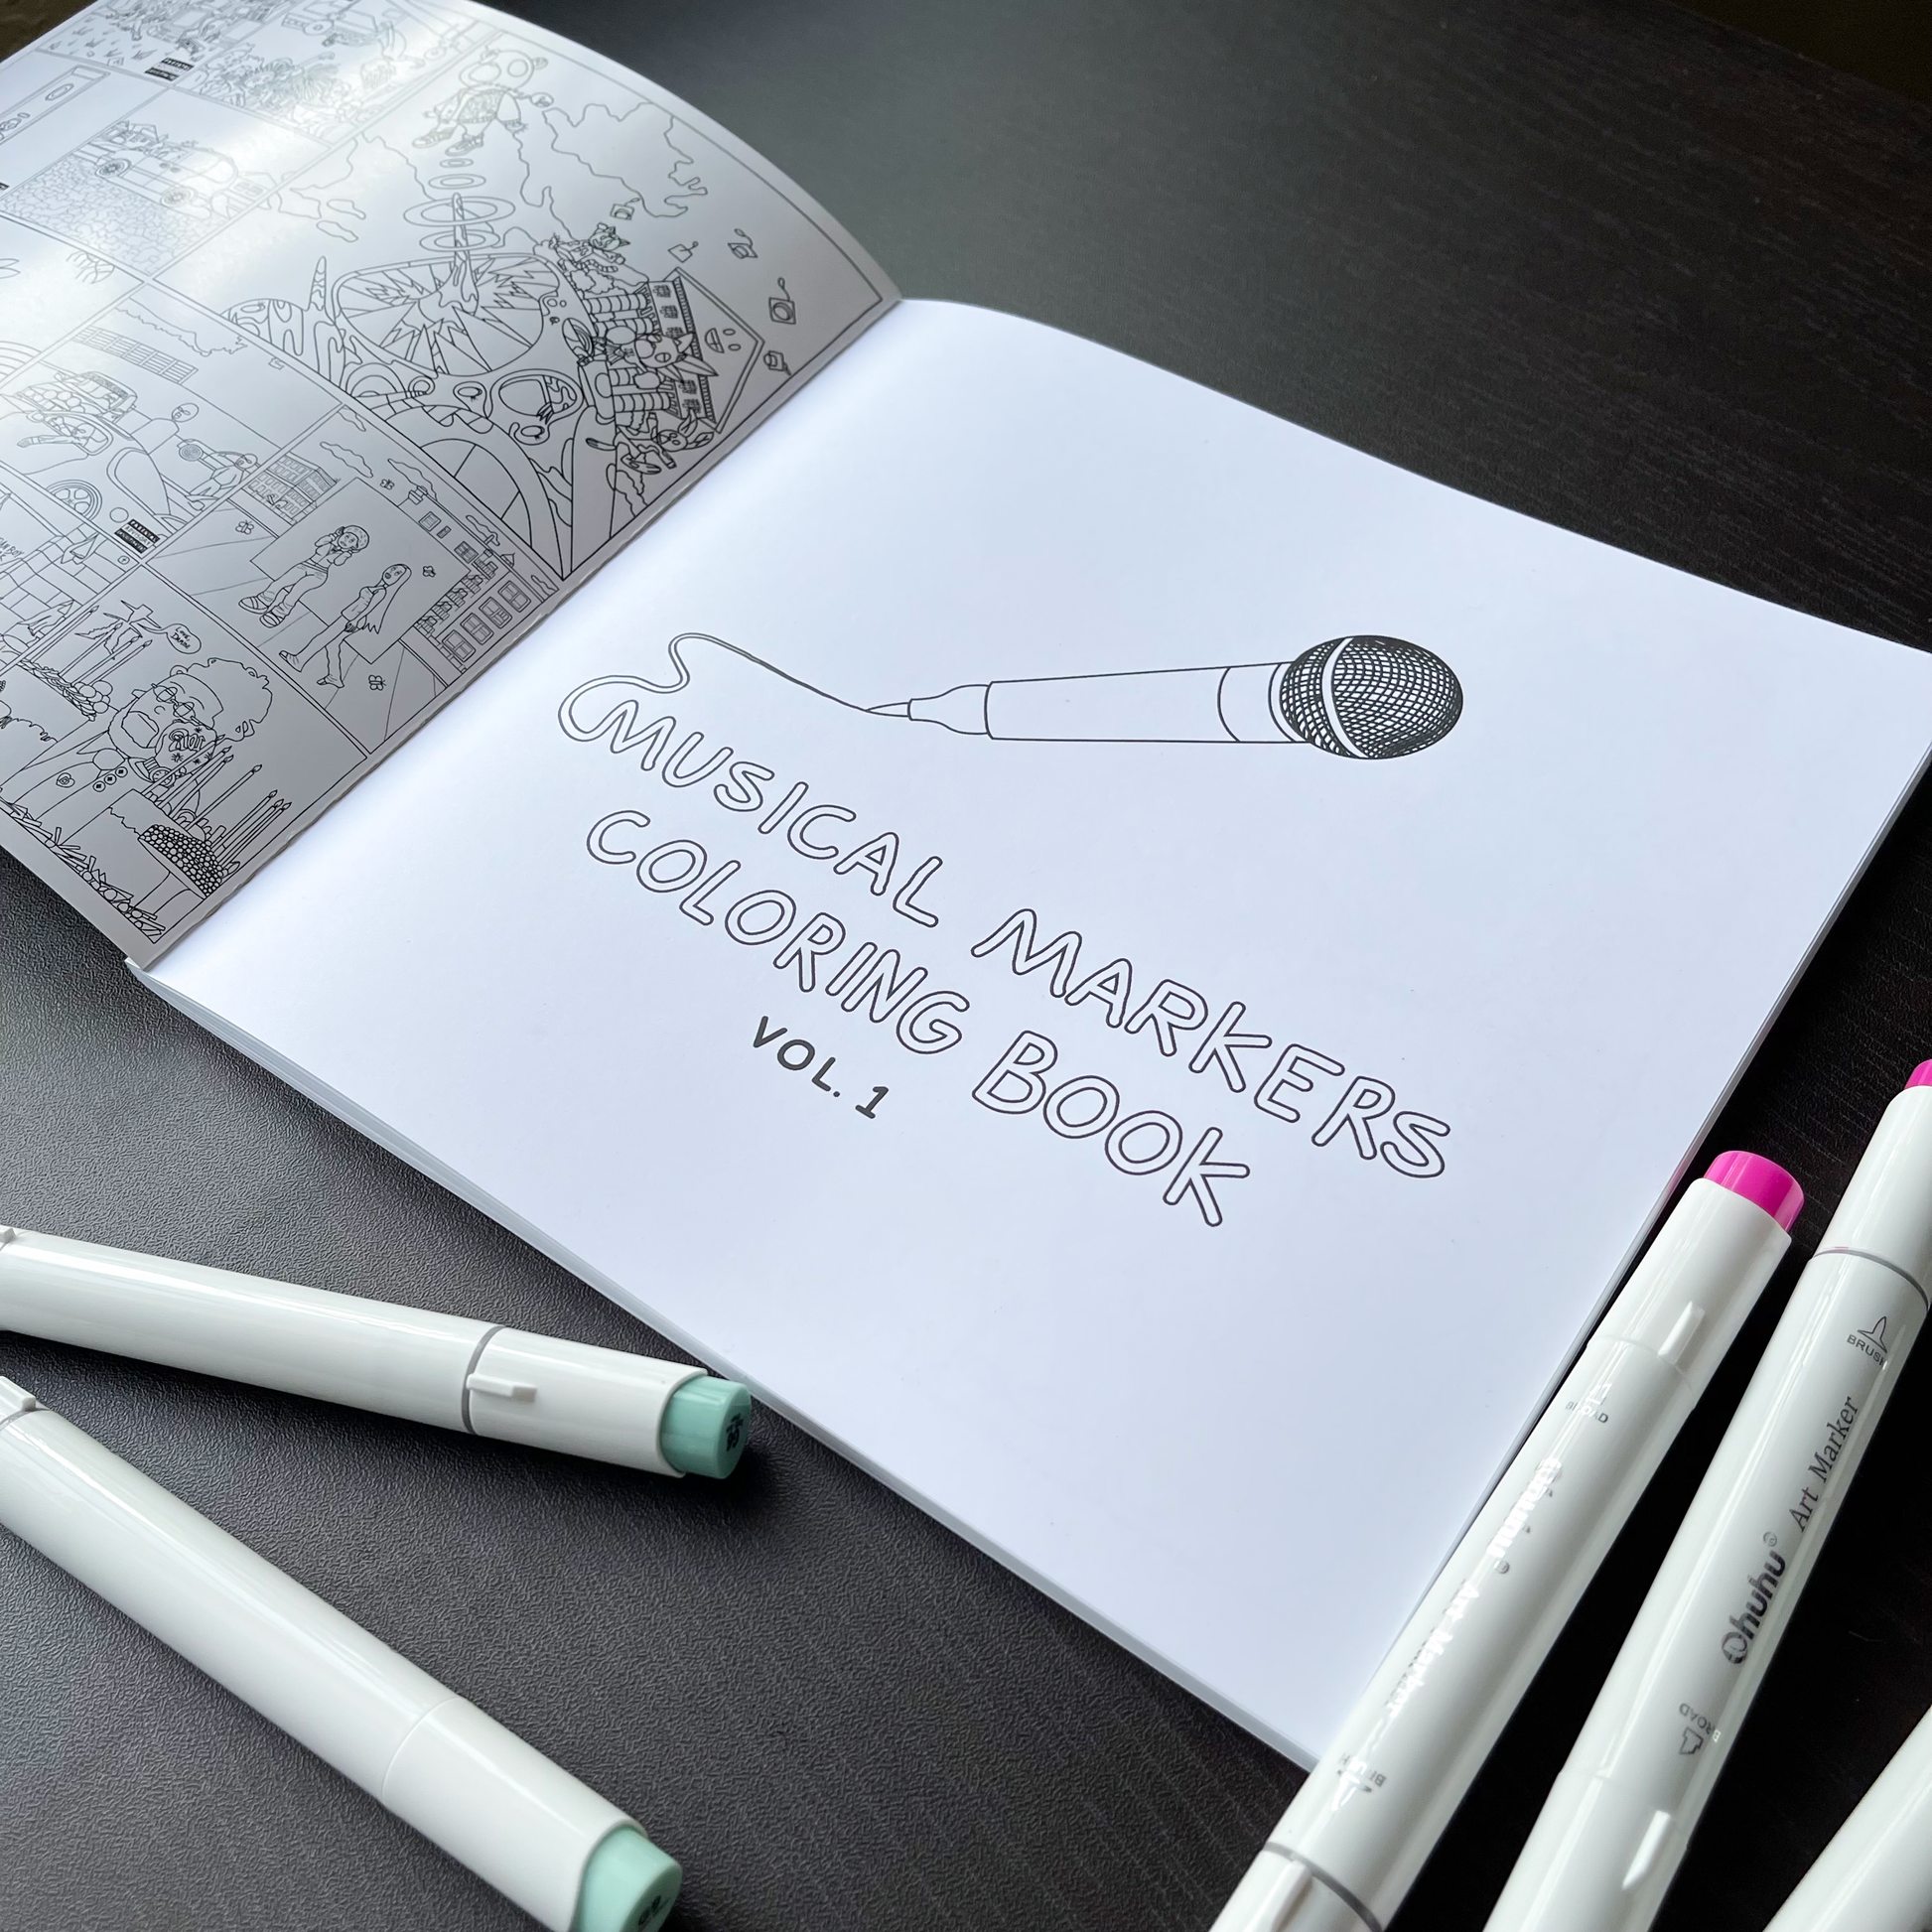 MUSICAL MARKERS COLORING BOOK VOL.1 – Musical Markers